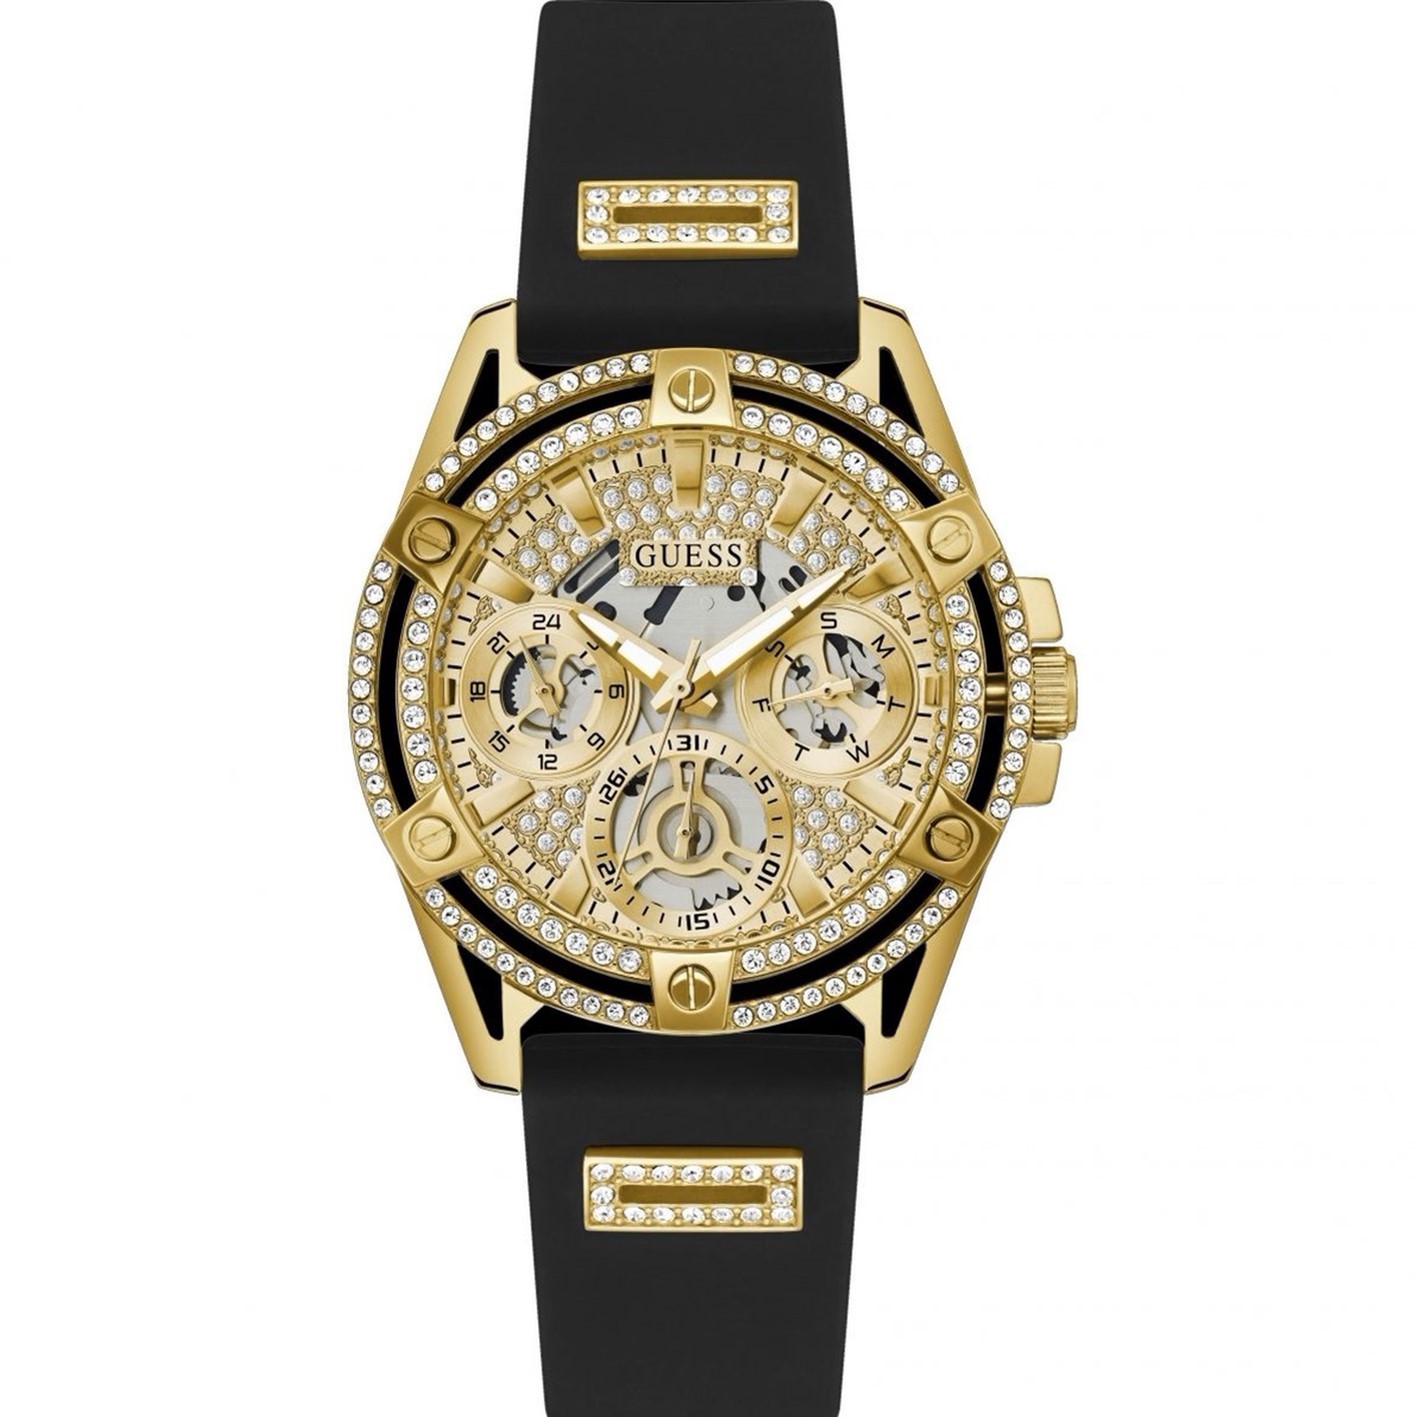 ĐỒNG HỒ ĐEO TAY GUESS GOLD-TONE MULTI-FUNCTION BLACK SILICONE WATCH GW0536L3 5